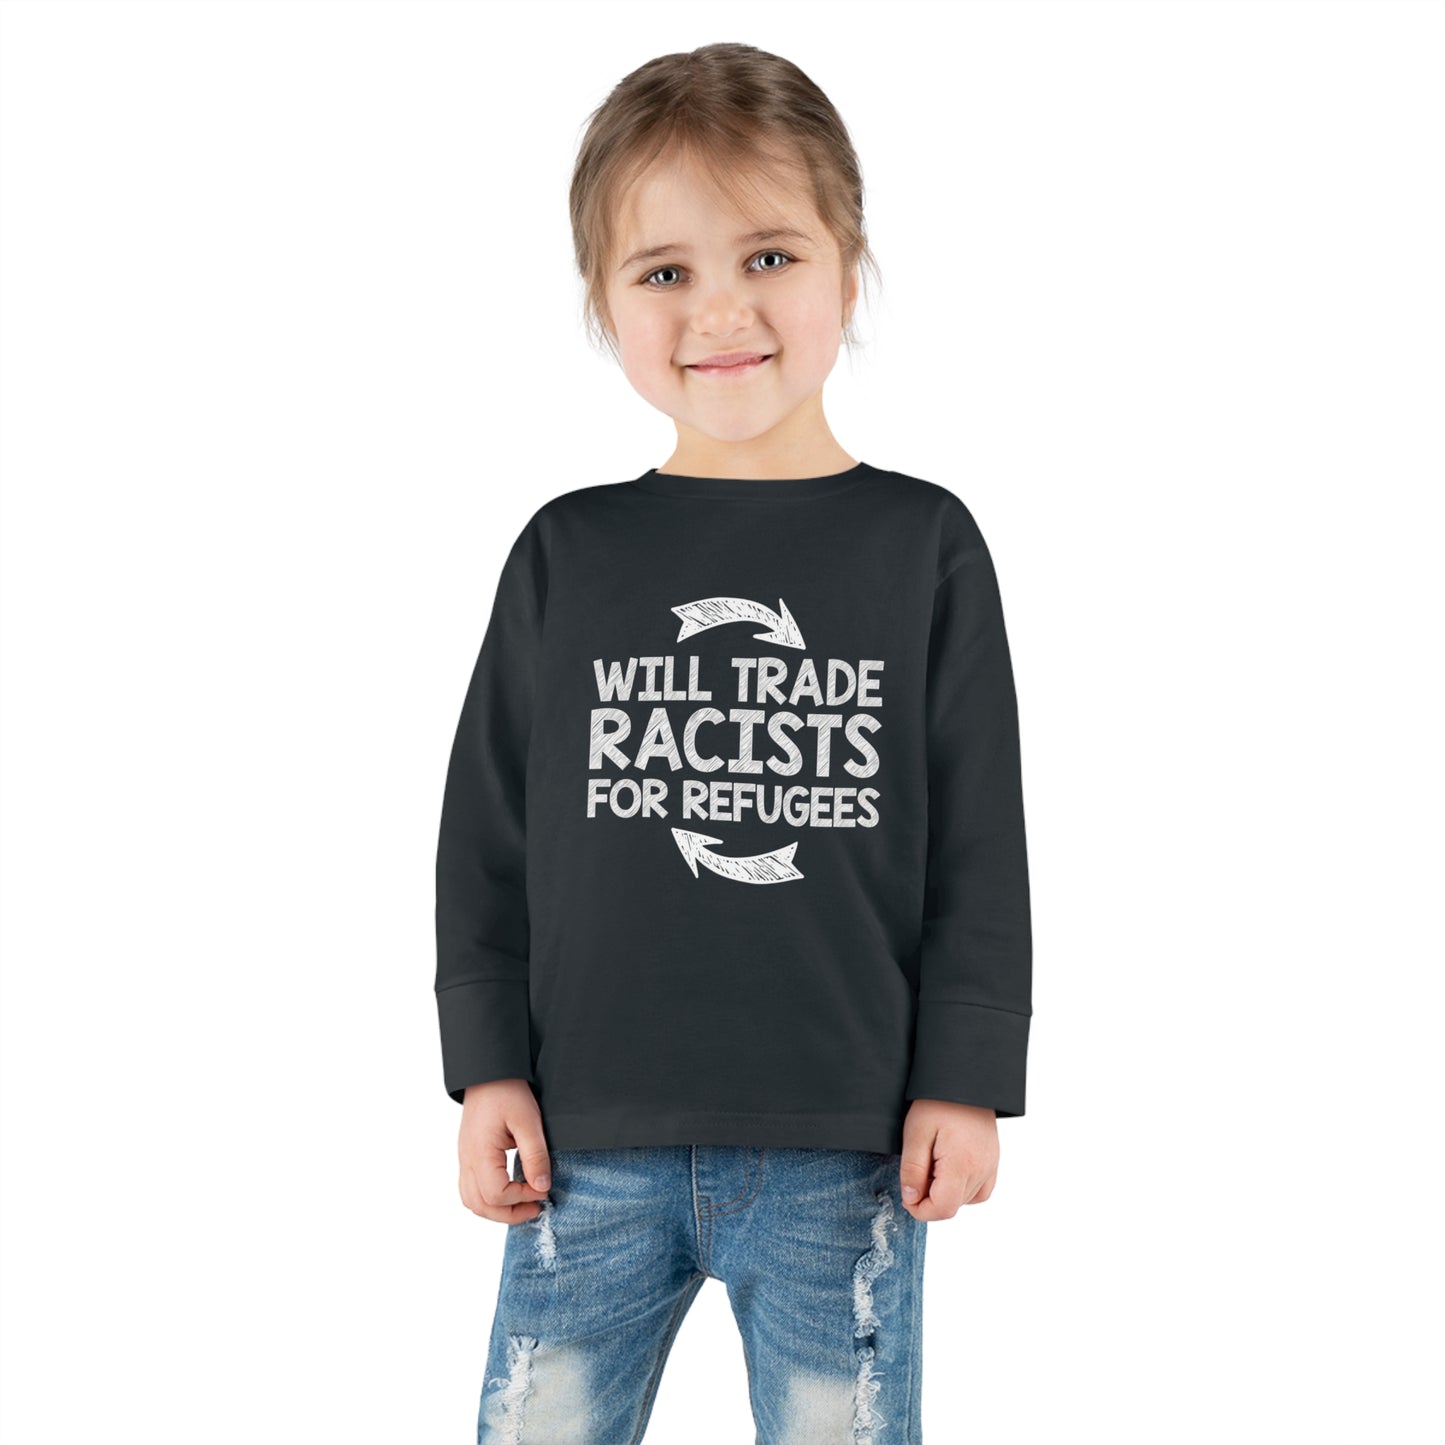 “Will Trade Racists for Refugees” Toddler Long Sleeve Tee